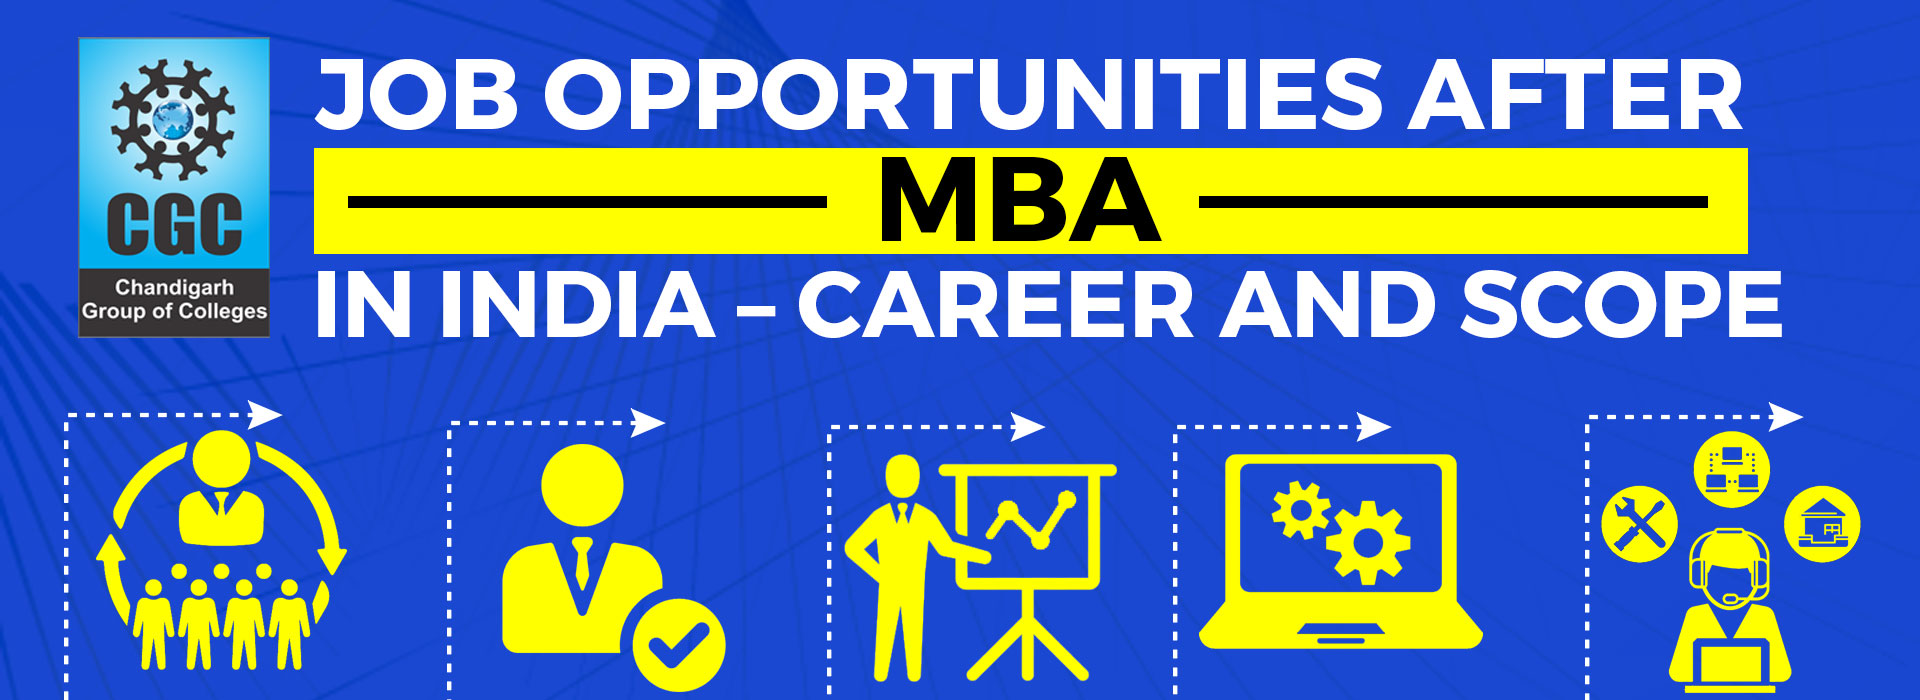 Job Opportunities after MBA in India – Career and Scope 